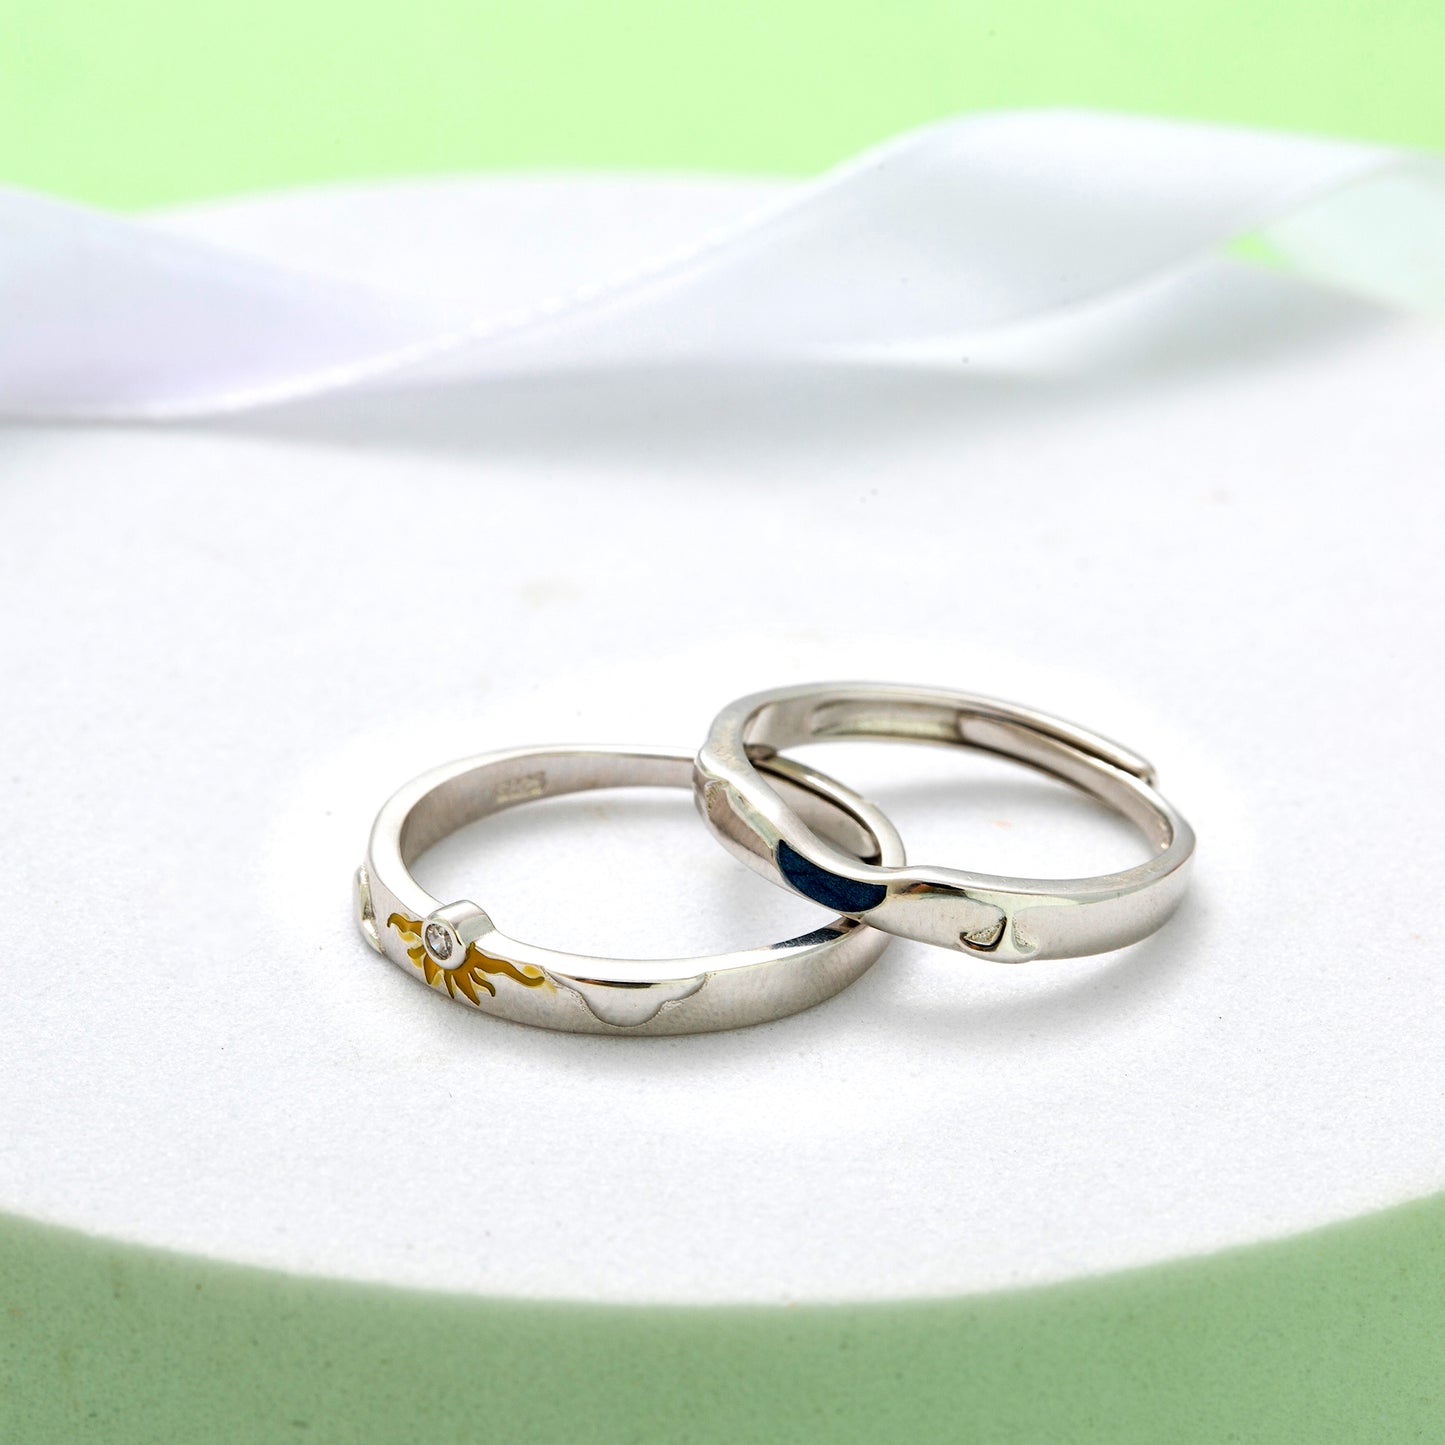 Sun Moon 925 Sterling Silver Couple Rings Adjustable in Sizes